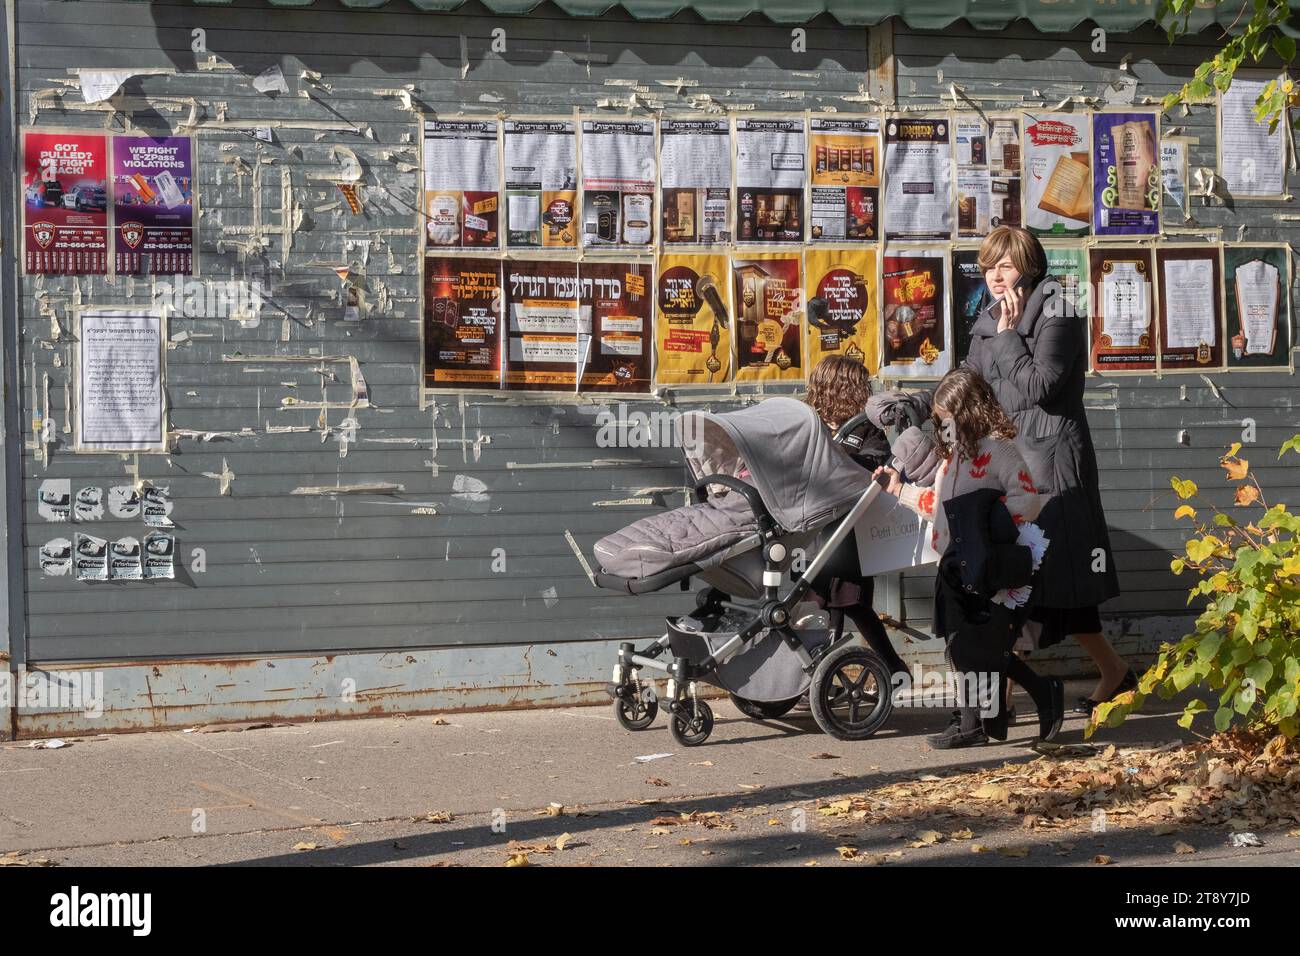 An orthodox Jewish woman and her 3 children walk on a side street past community billboards & notices in Williamsburg, Brooklyn, New York. Stock Photo